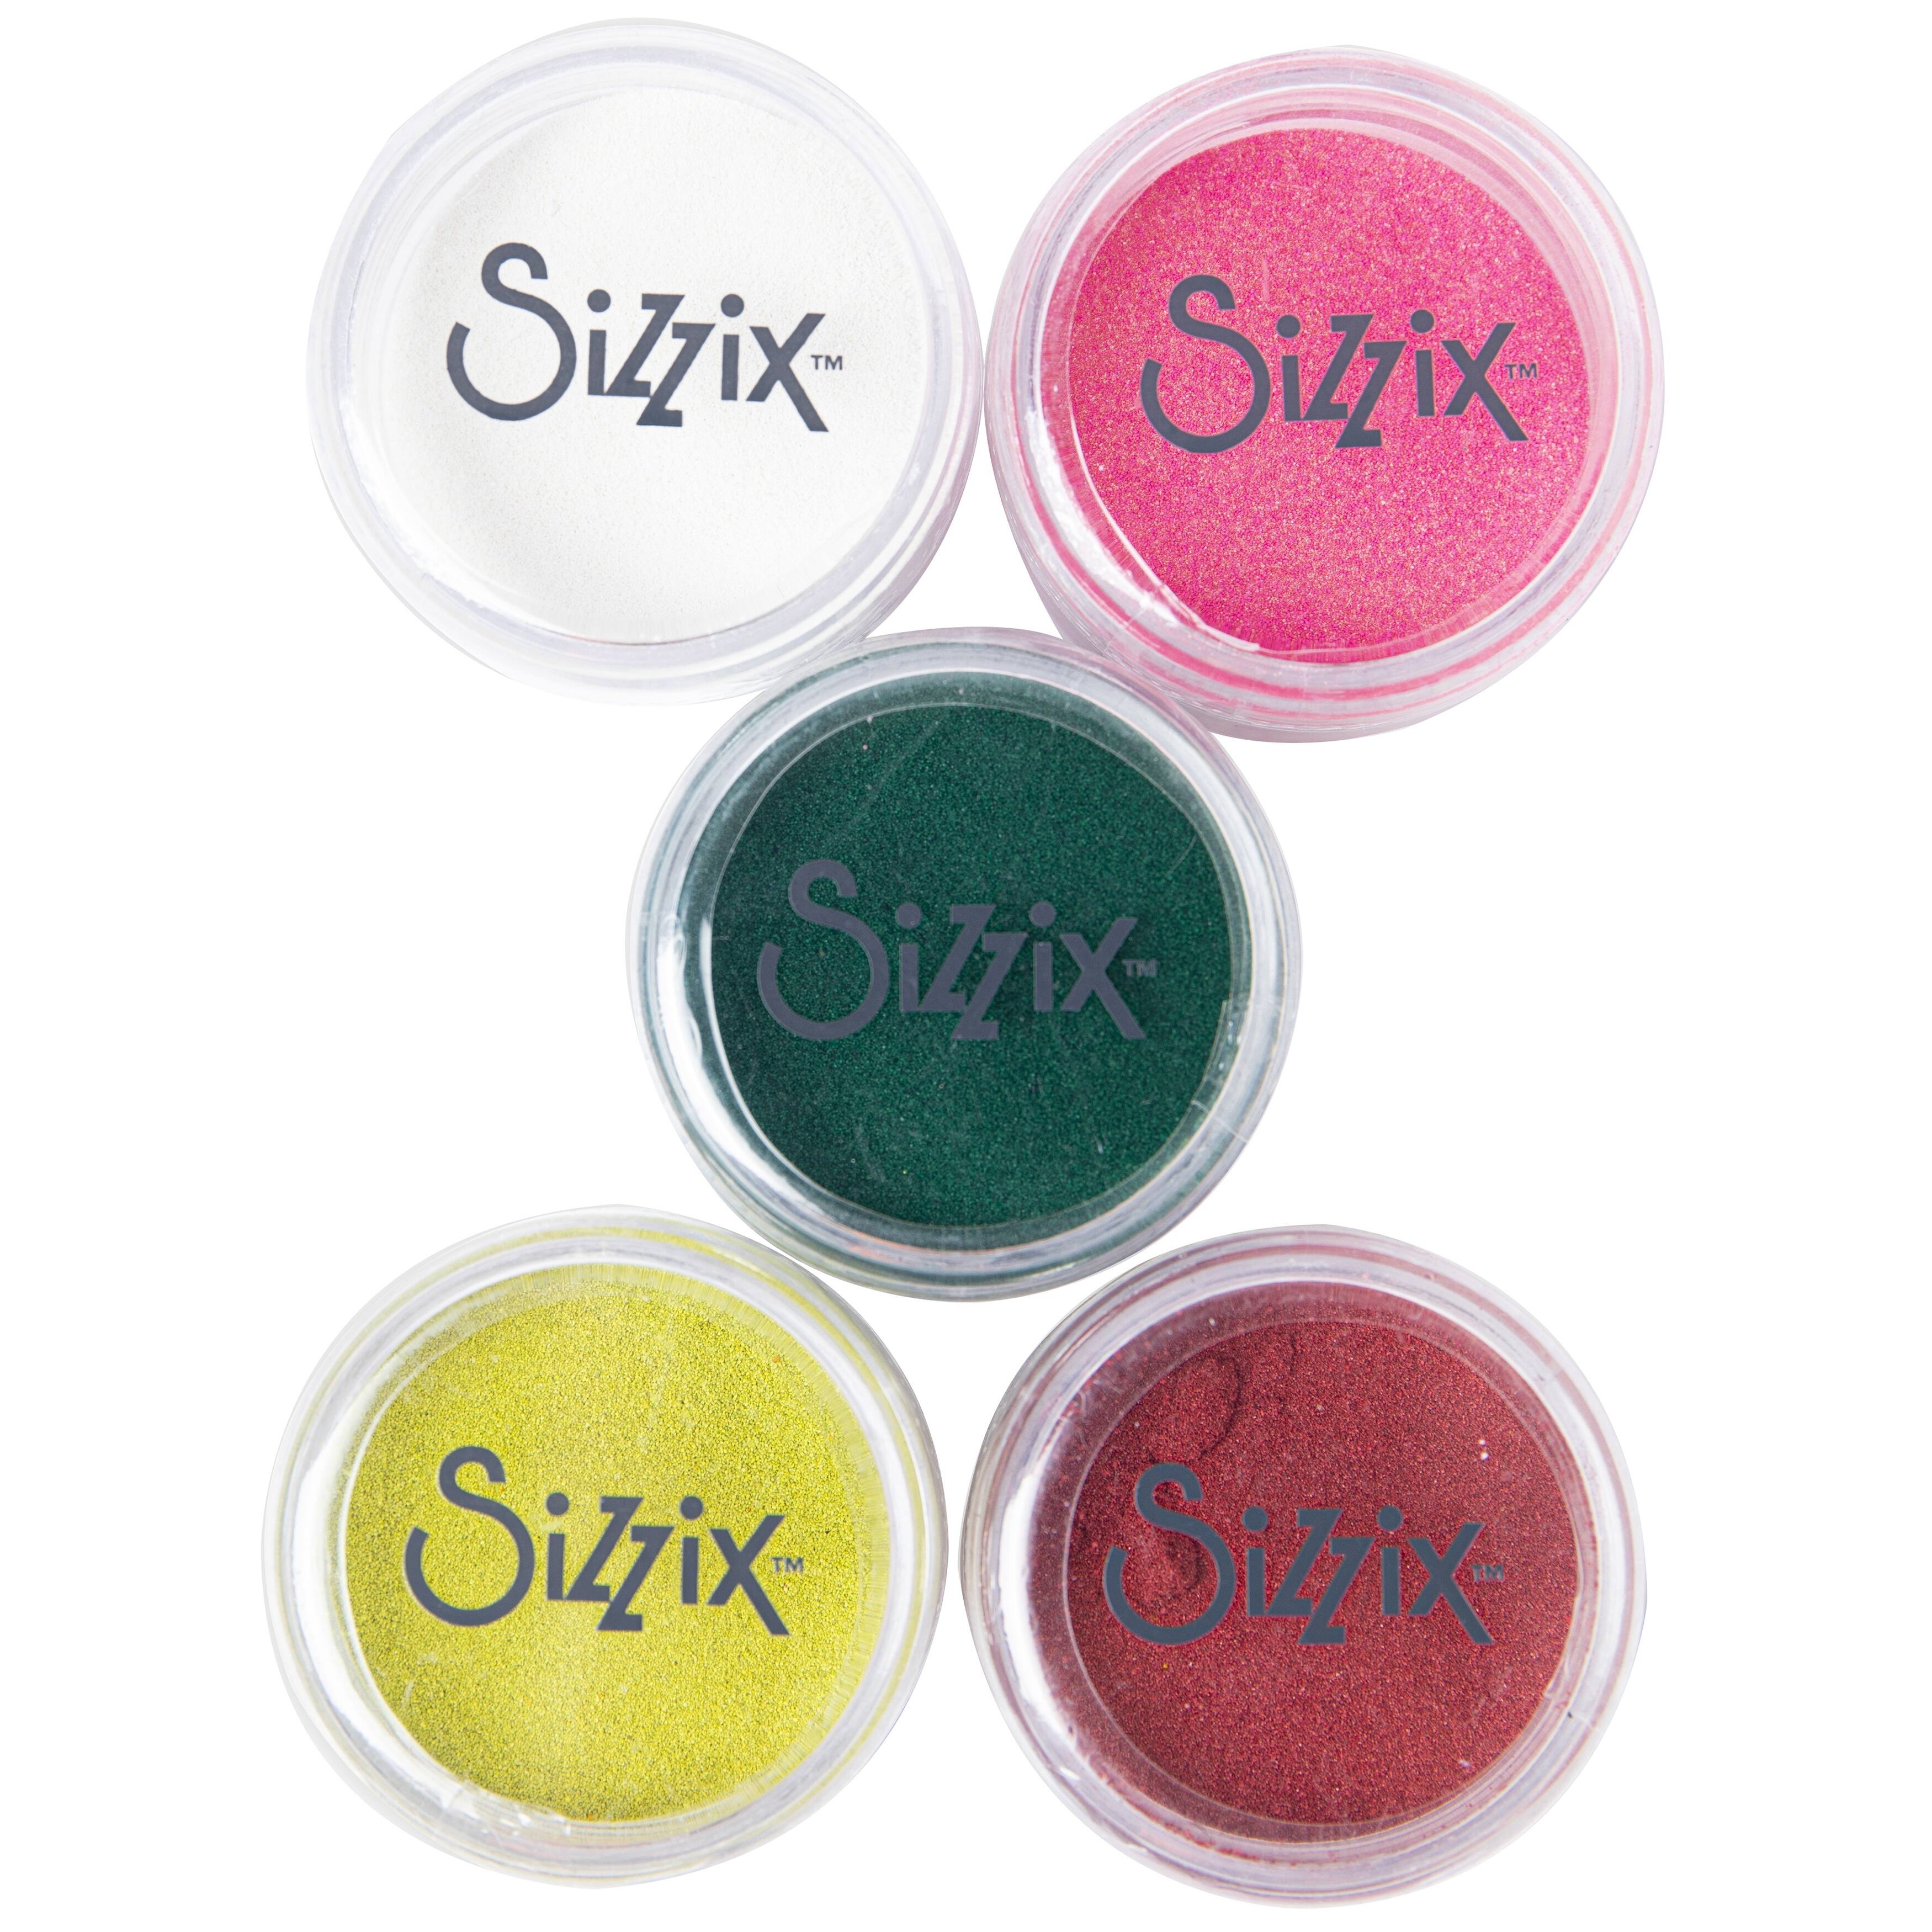 Sizzix Making Essential Opaque Embossing Powder-Mango Tango 12g One Size